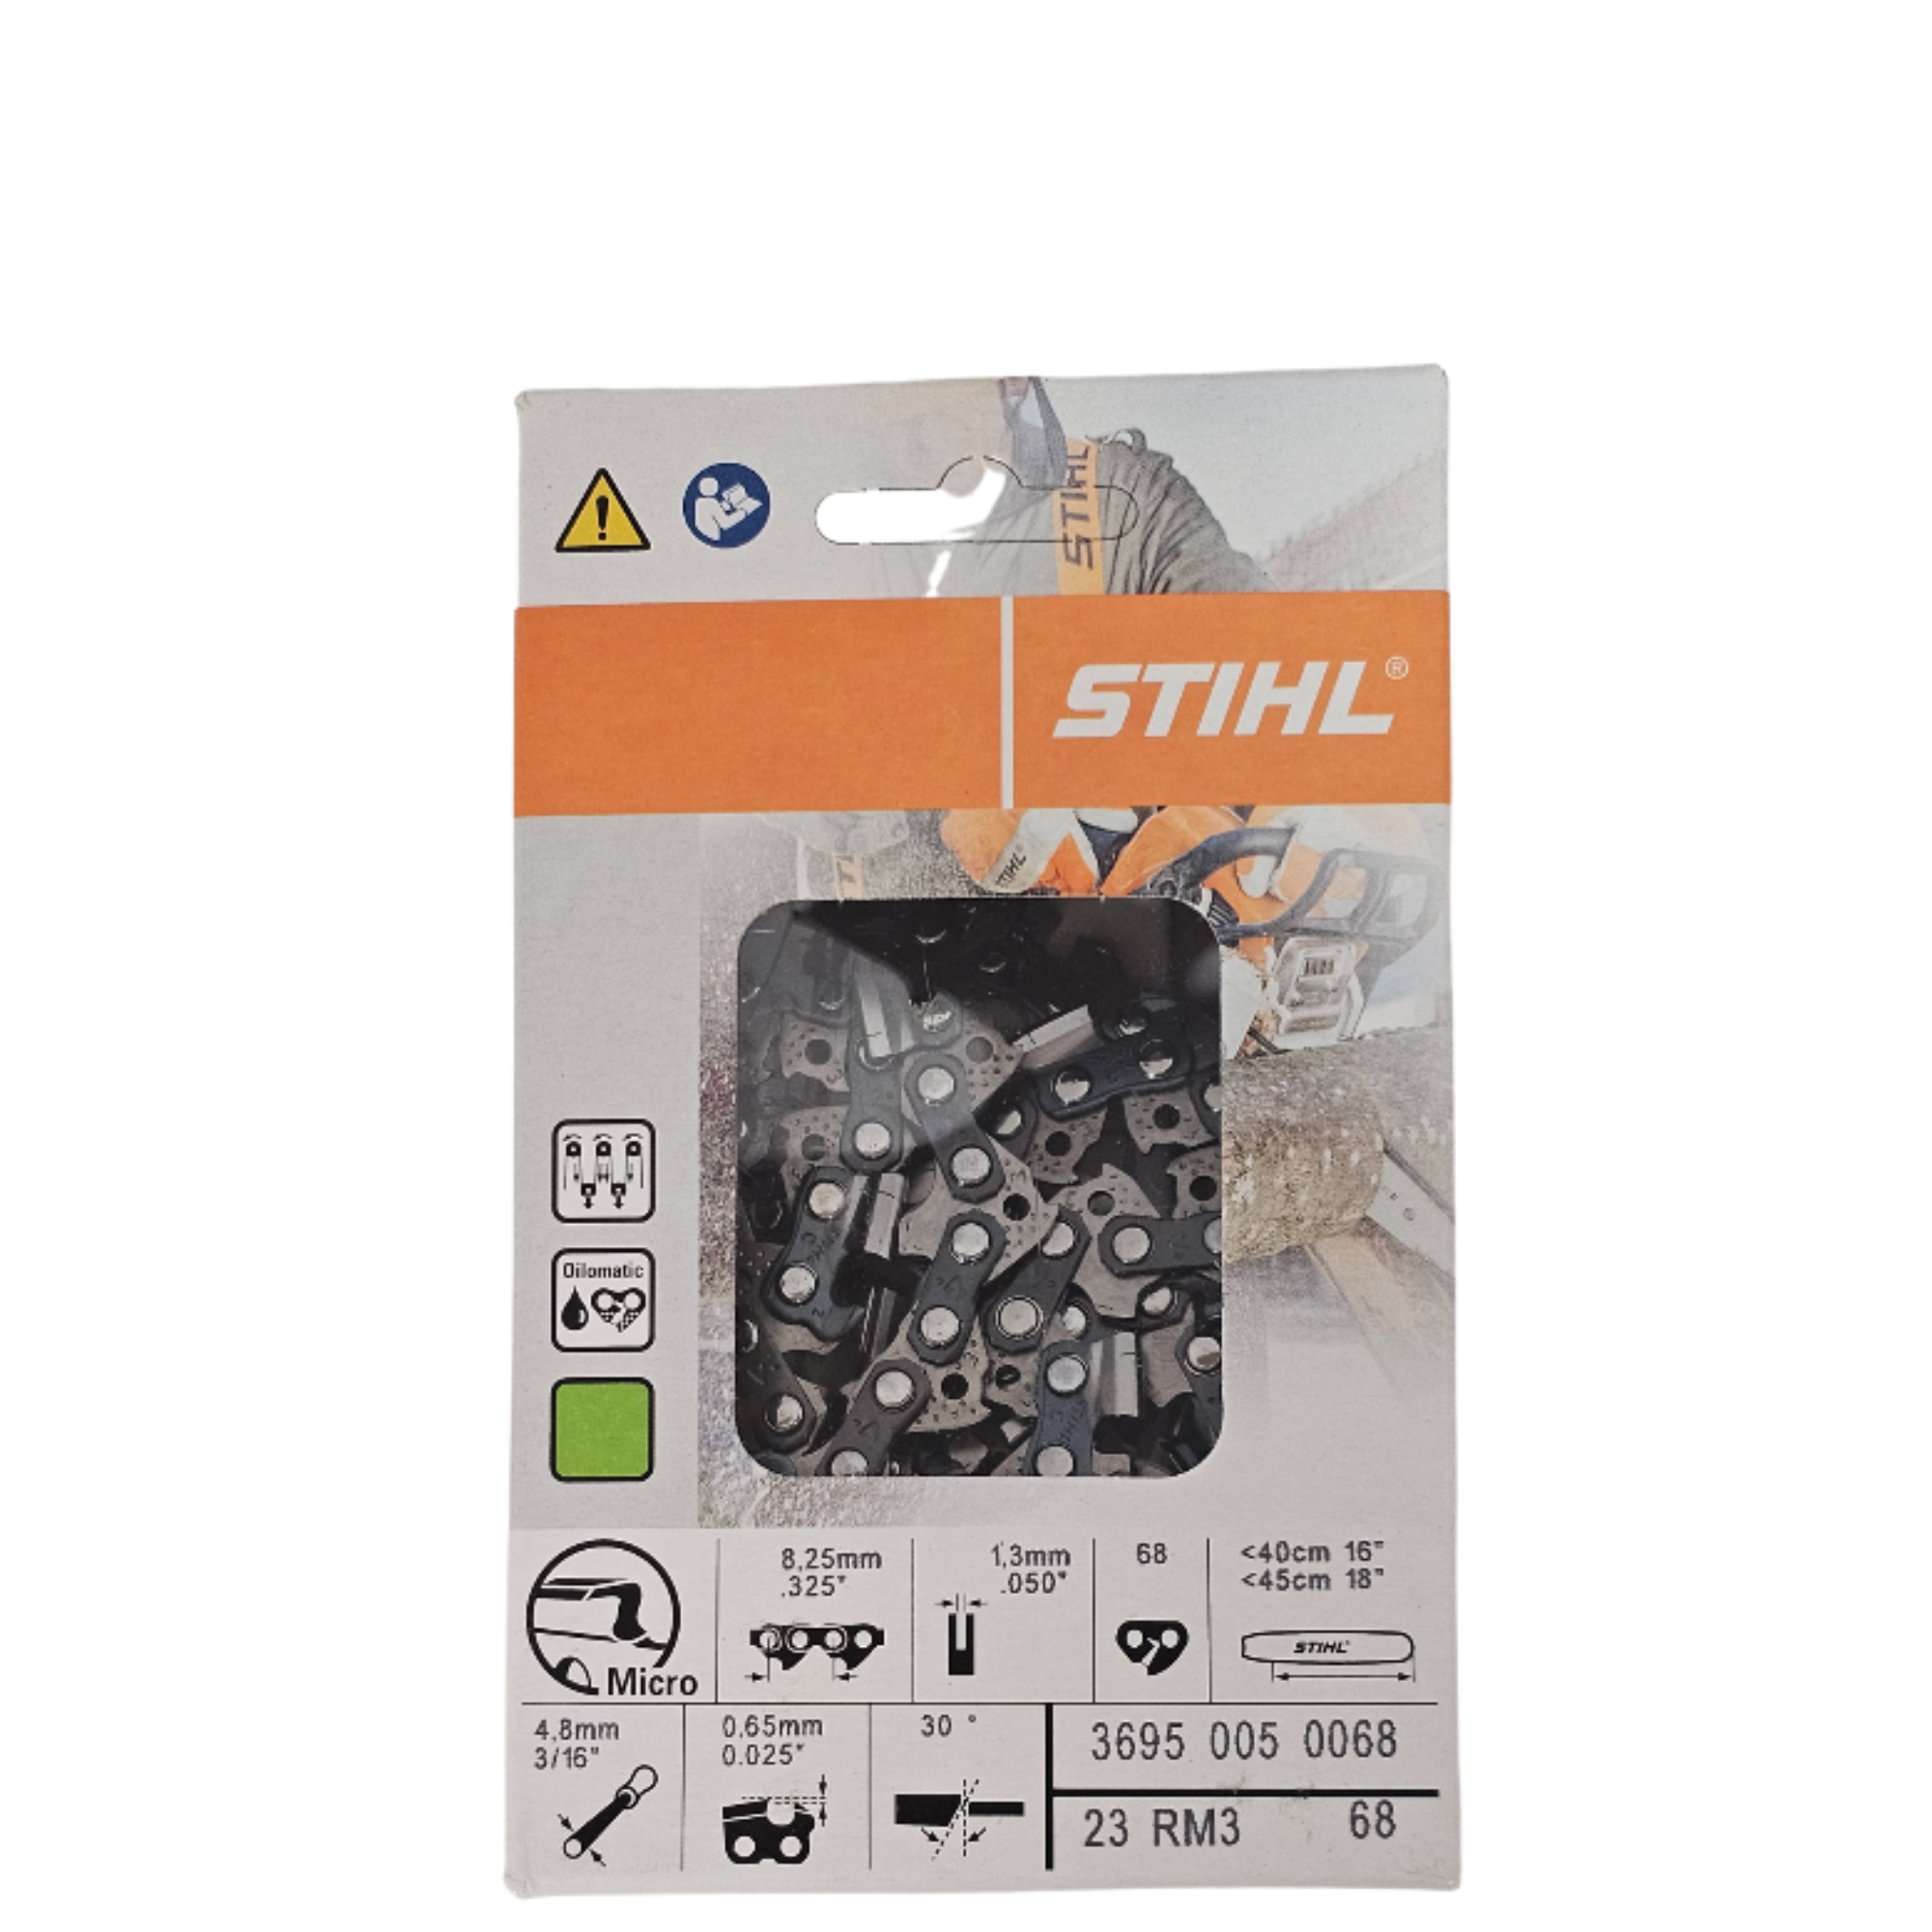 <FONT COLOR=RED >BULK </FONT COLOR=RED > | STIHL Oilomatic Rapid Micro 3 | 23 RM3 68 | 18 in. | 68 Drive Links | Chainsaw Chain | 3695 005 0068